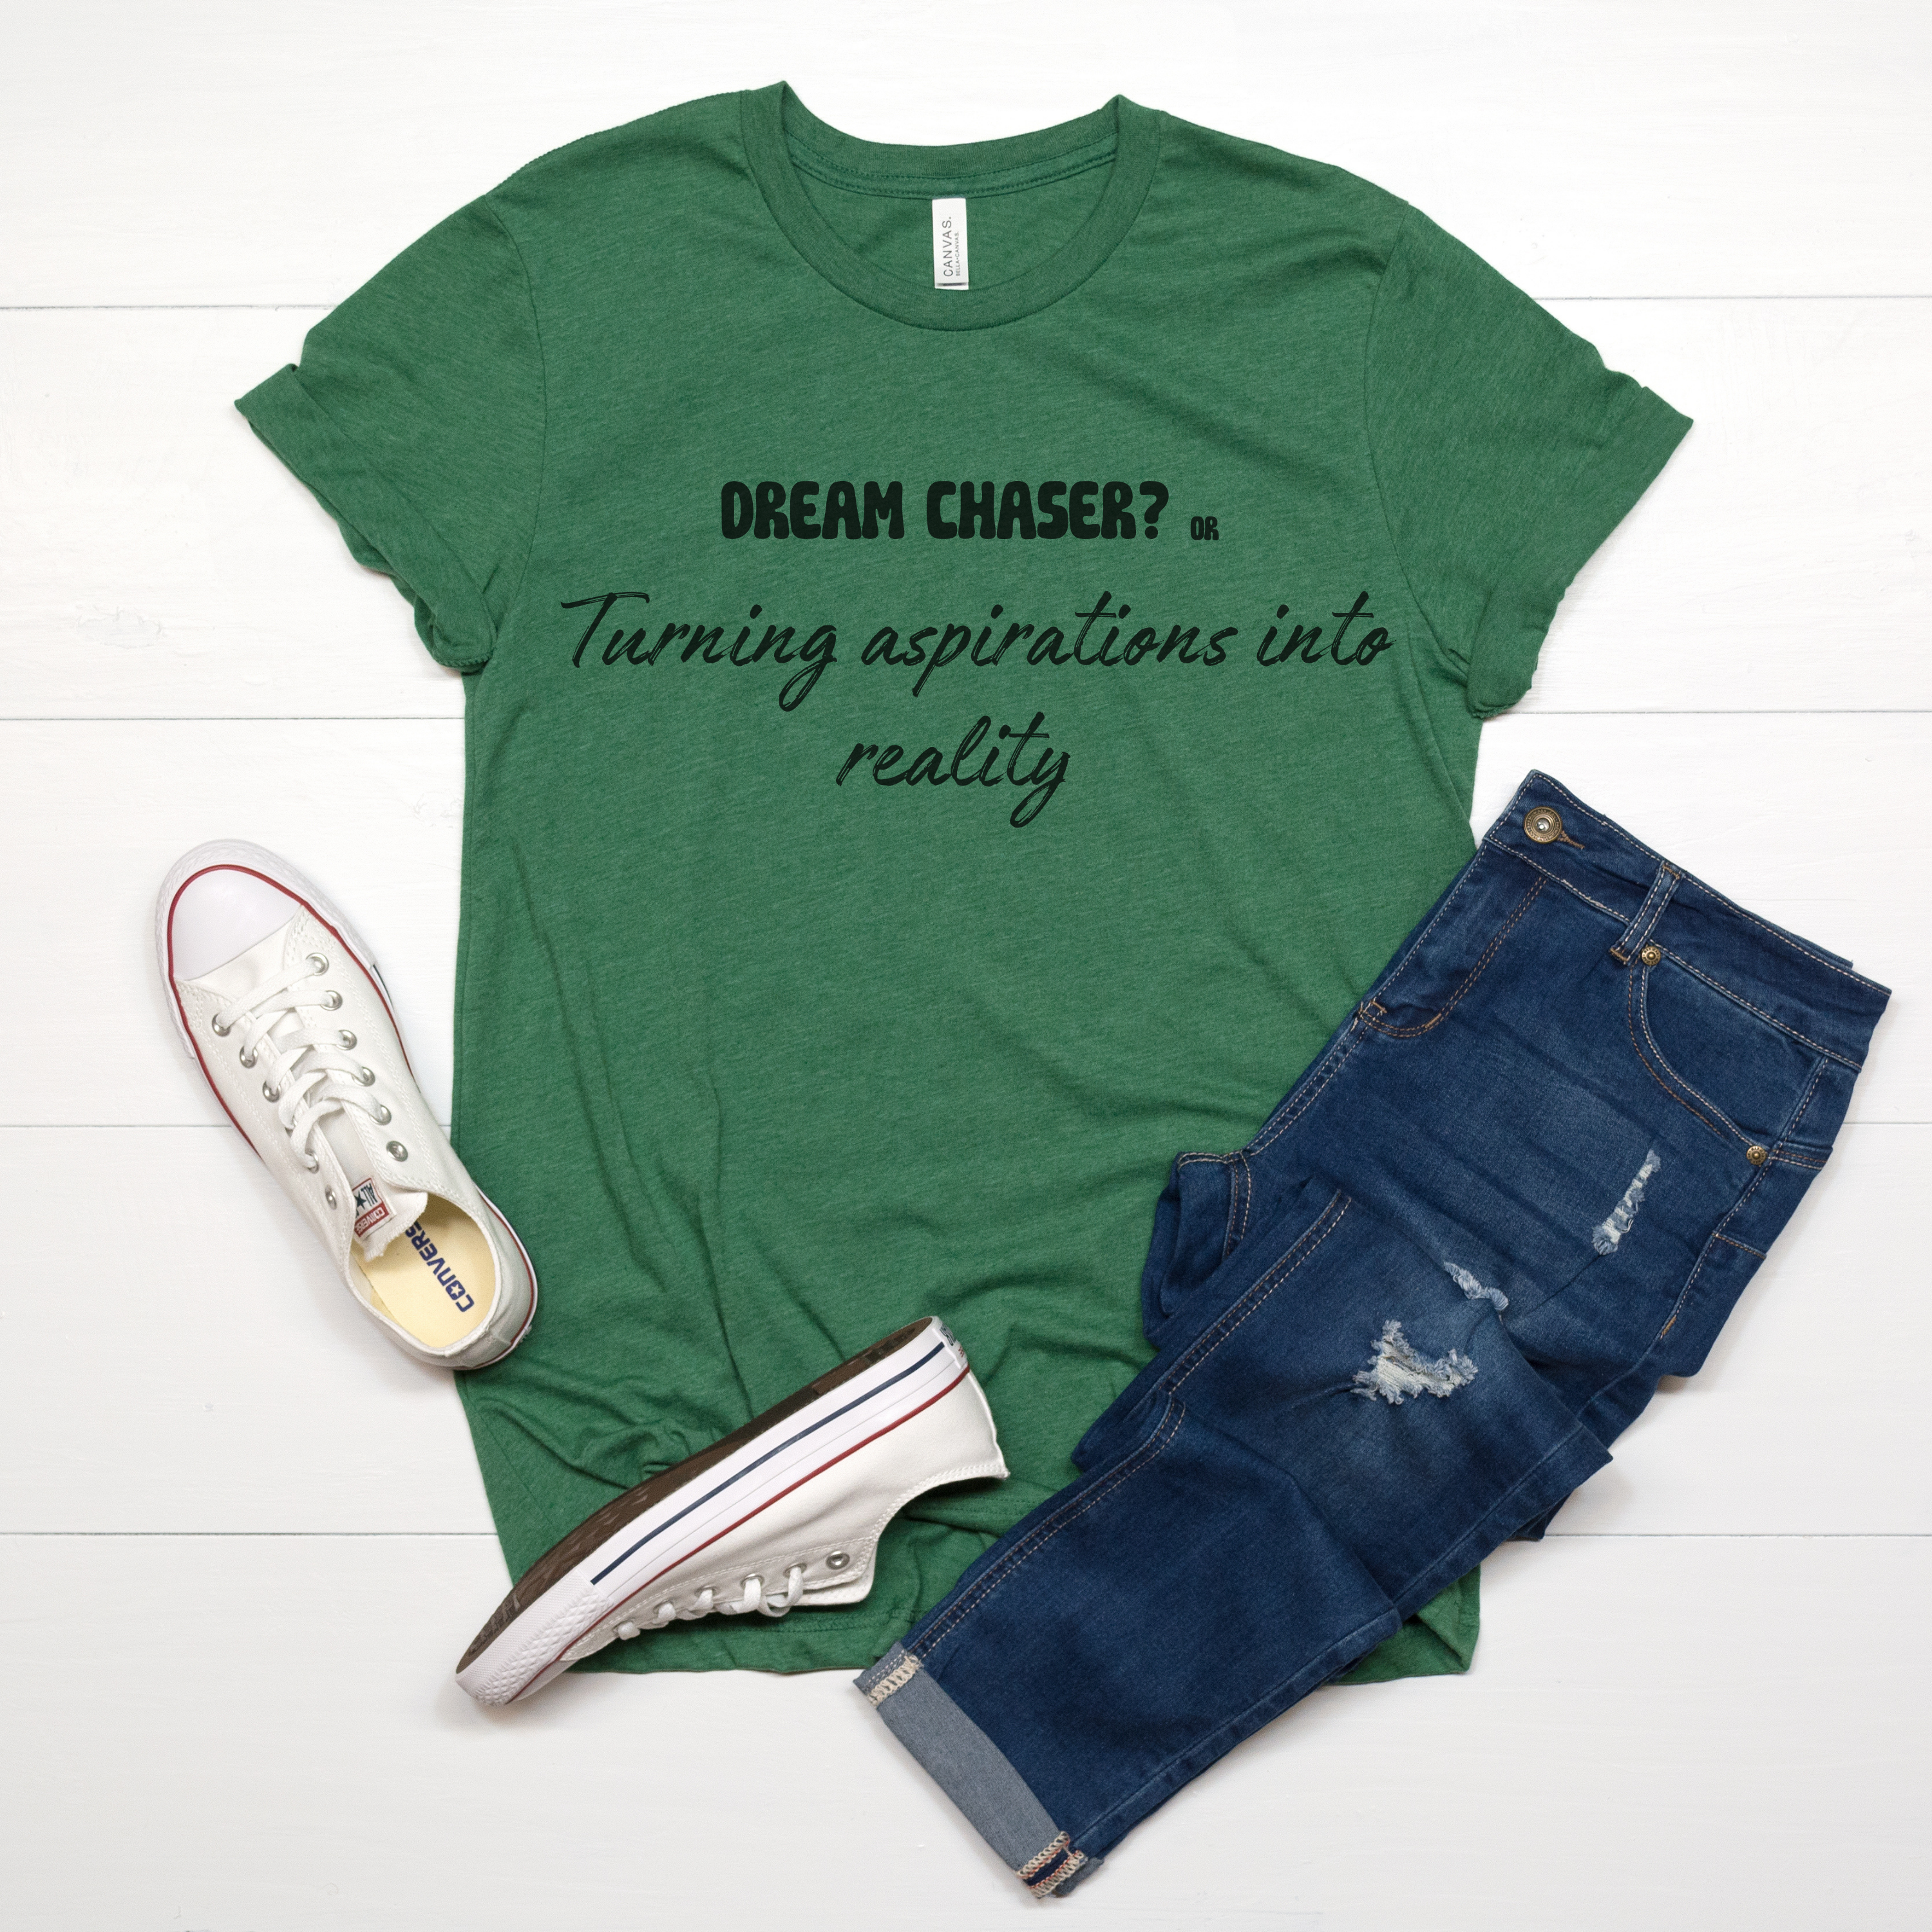 Dream chaser? or Turning aspirations into reality T-shirt.